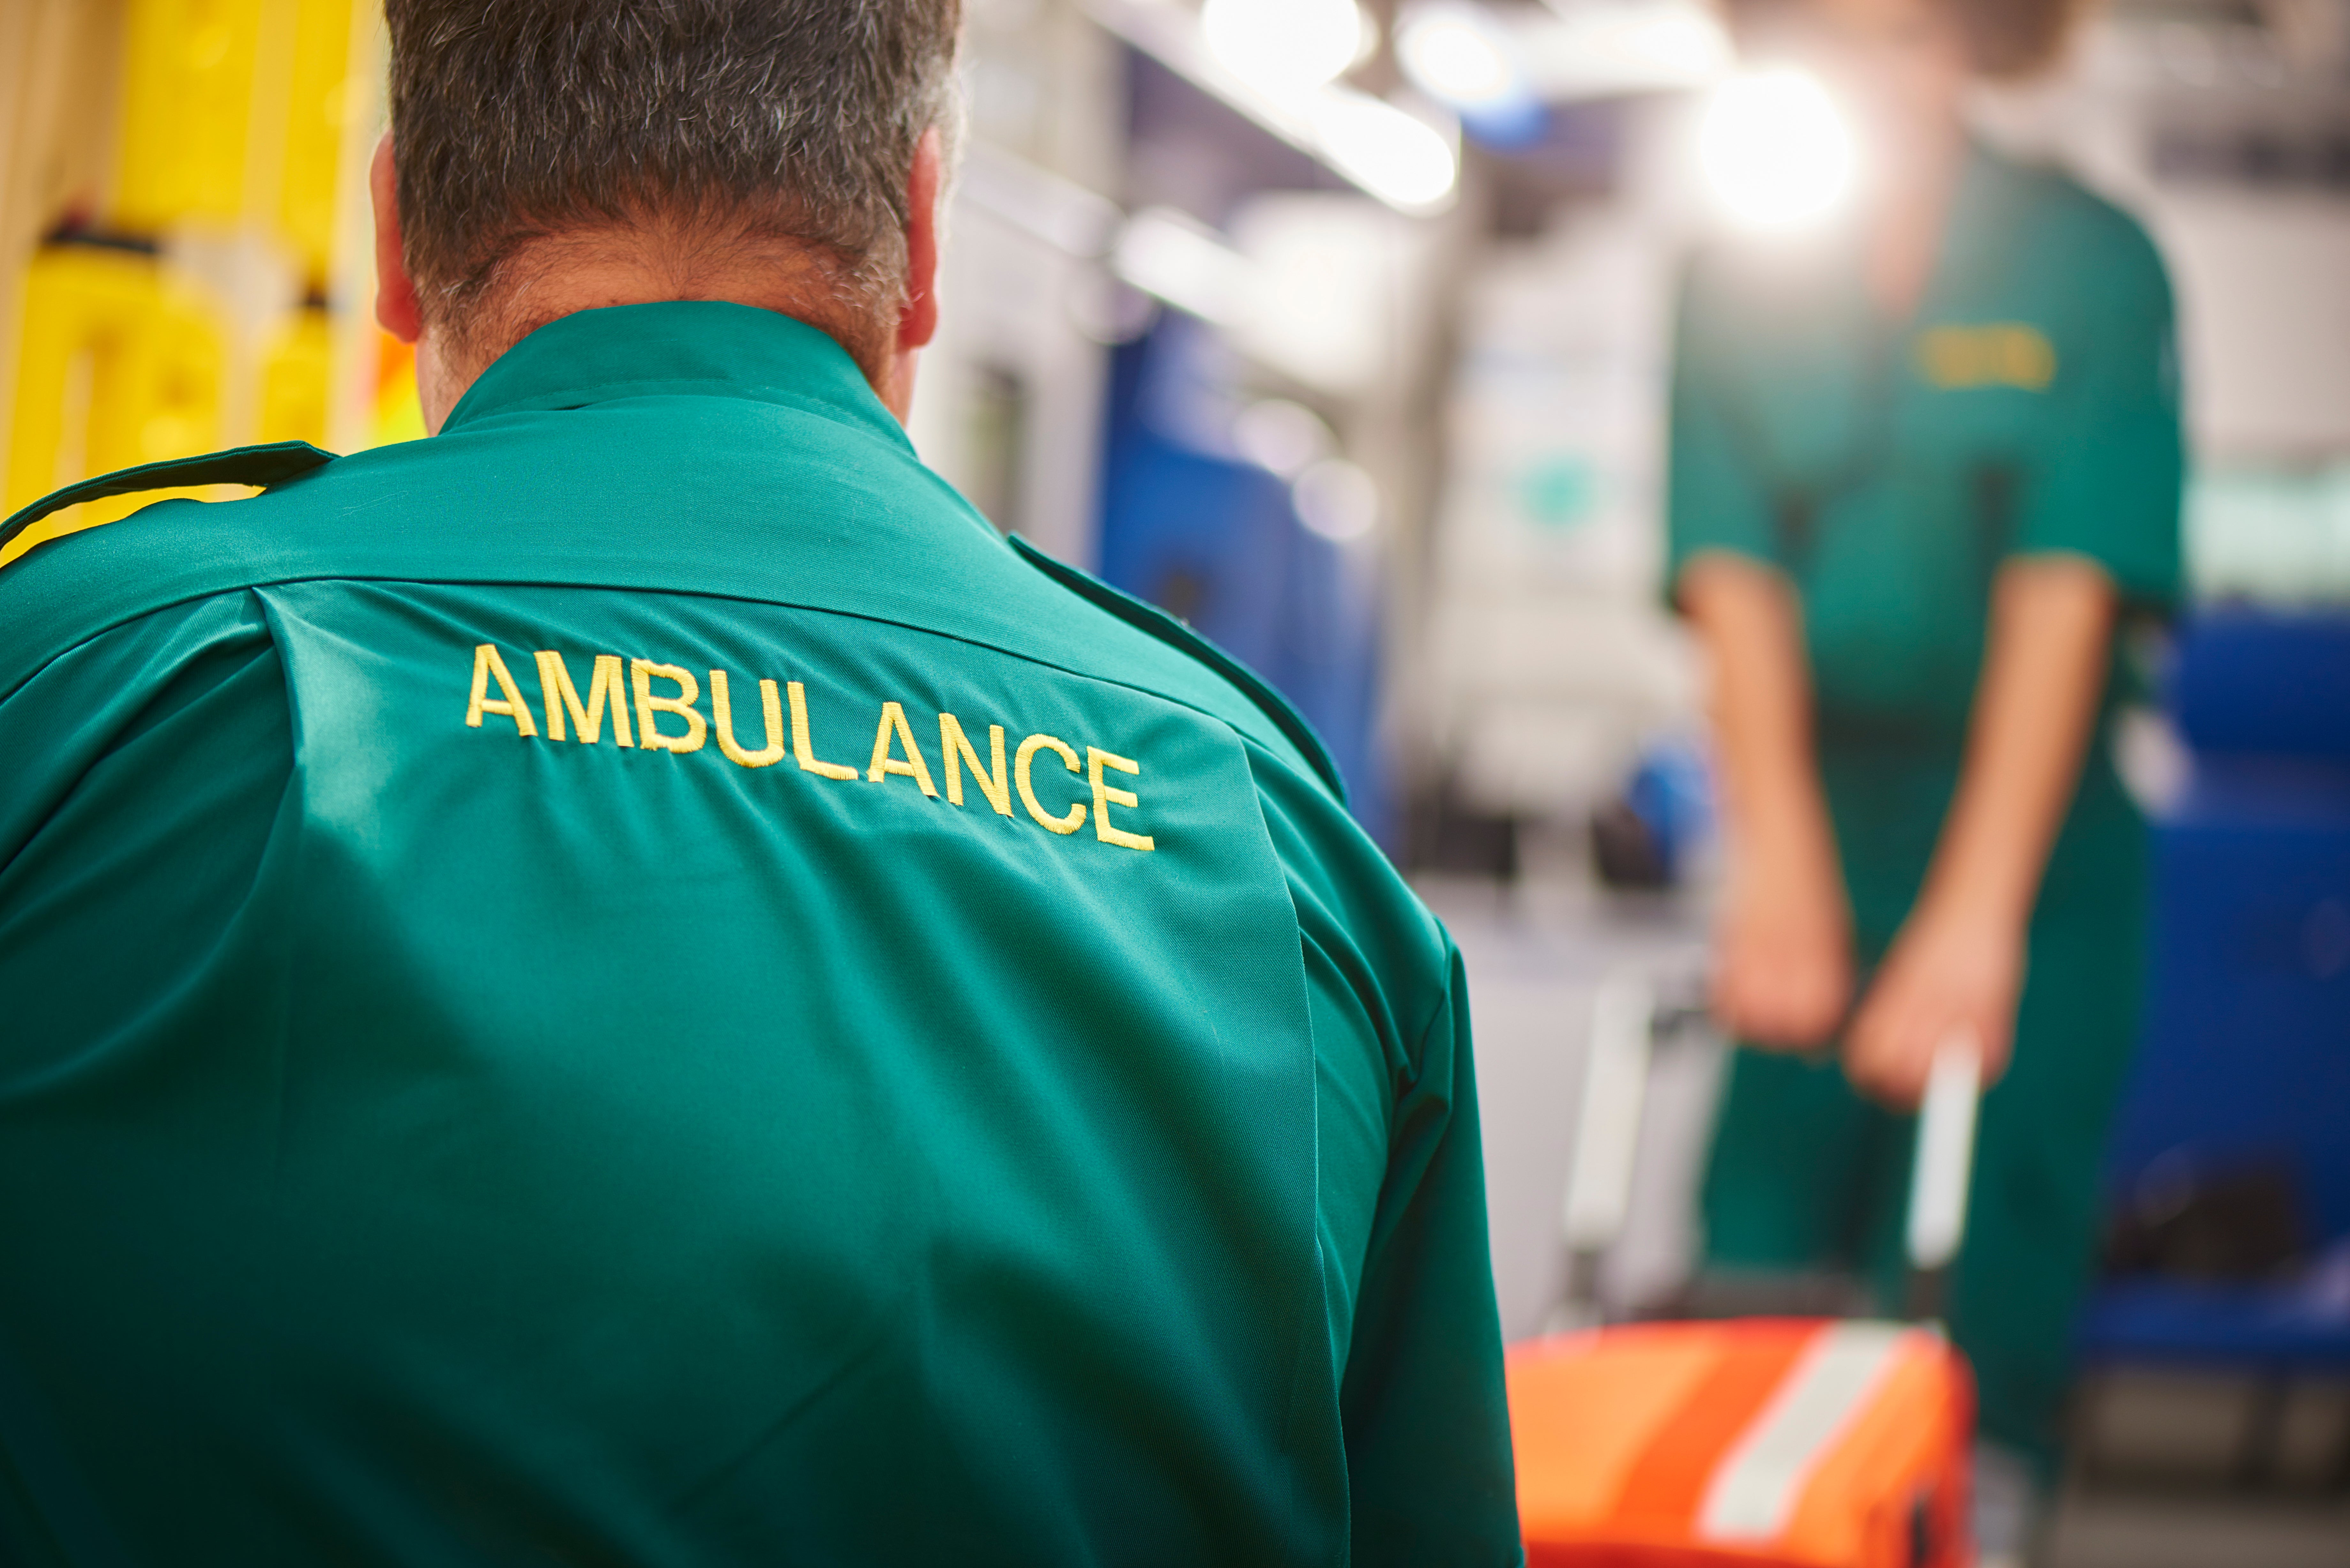 Assaults against female ambulance staff have risen by 48 per cent in the last five years